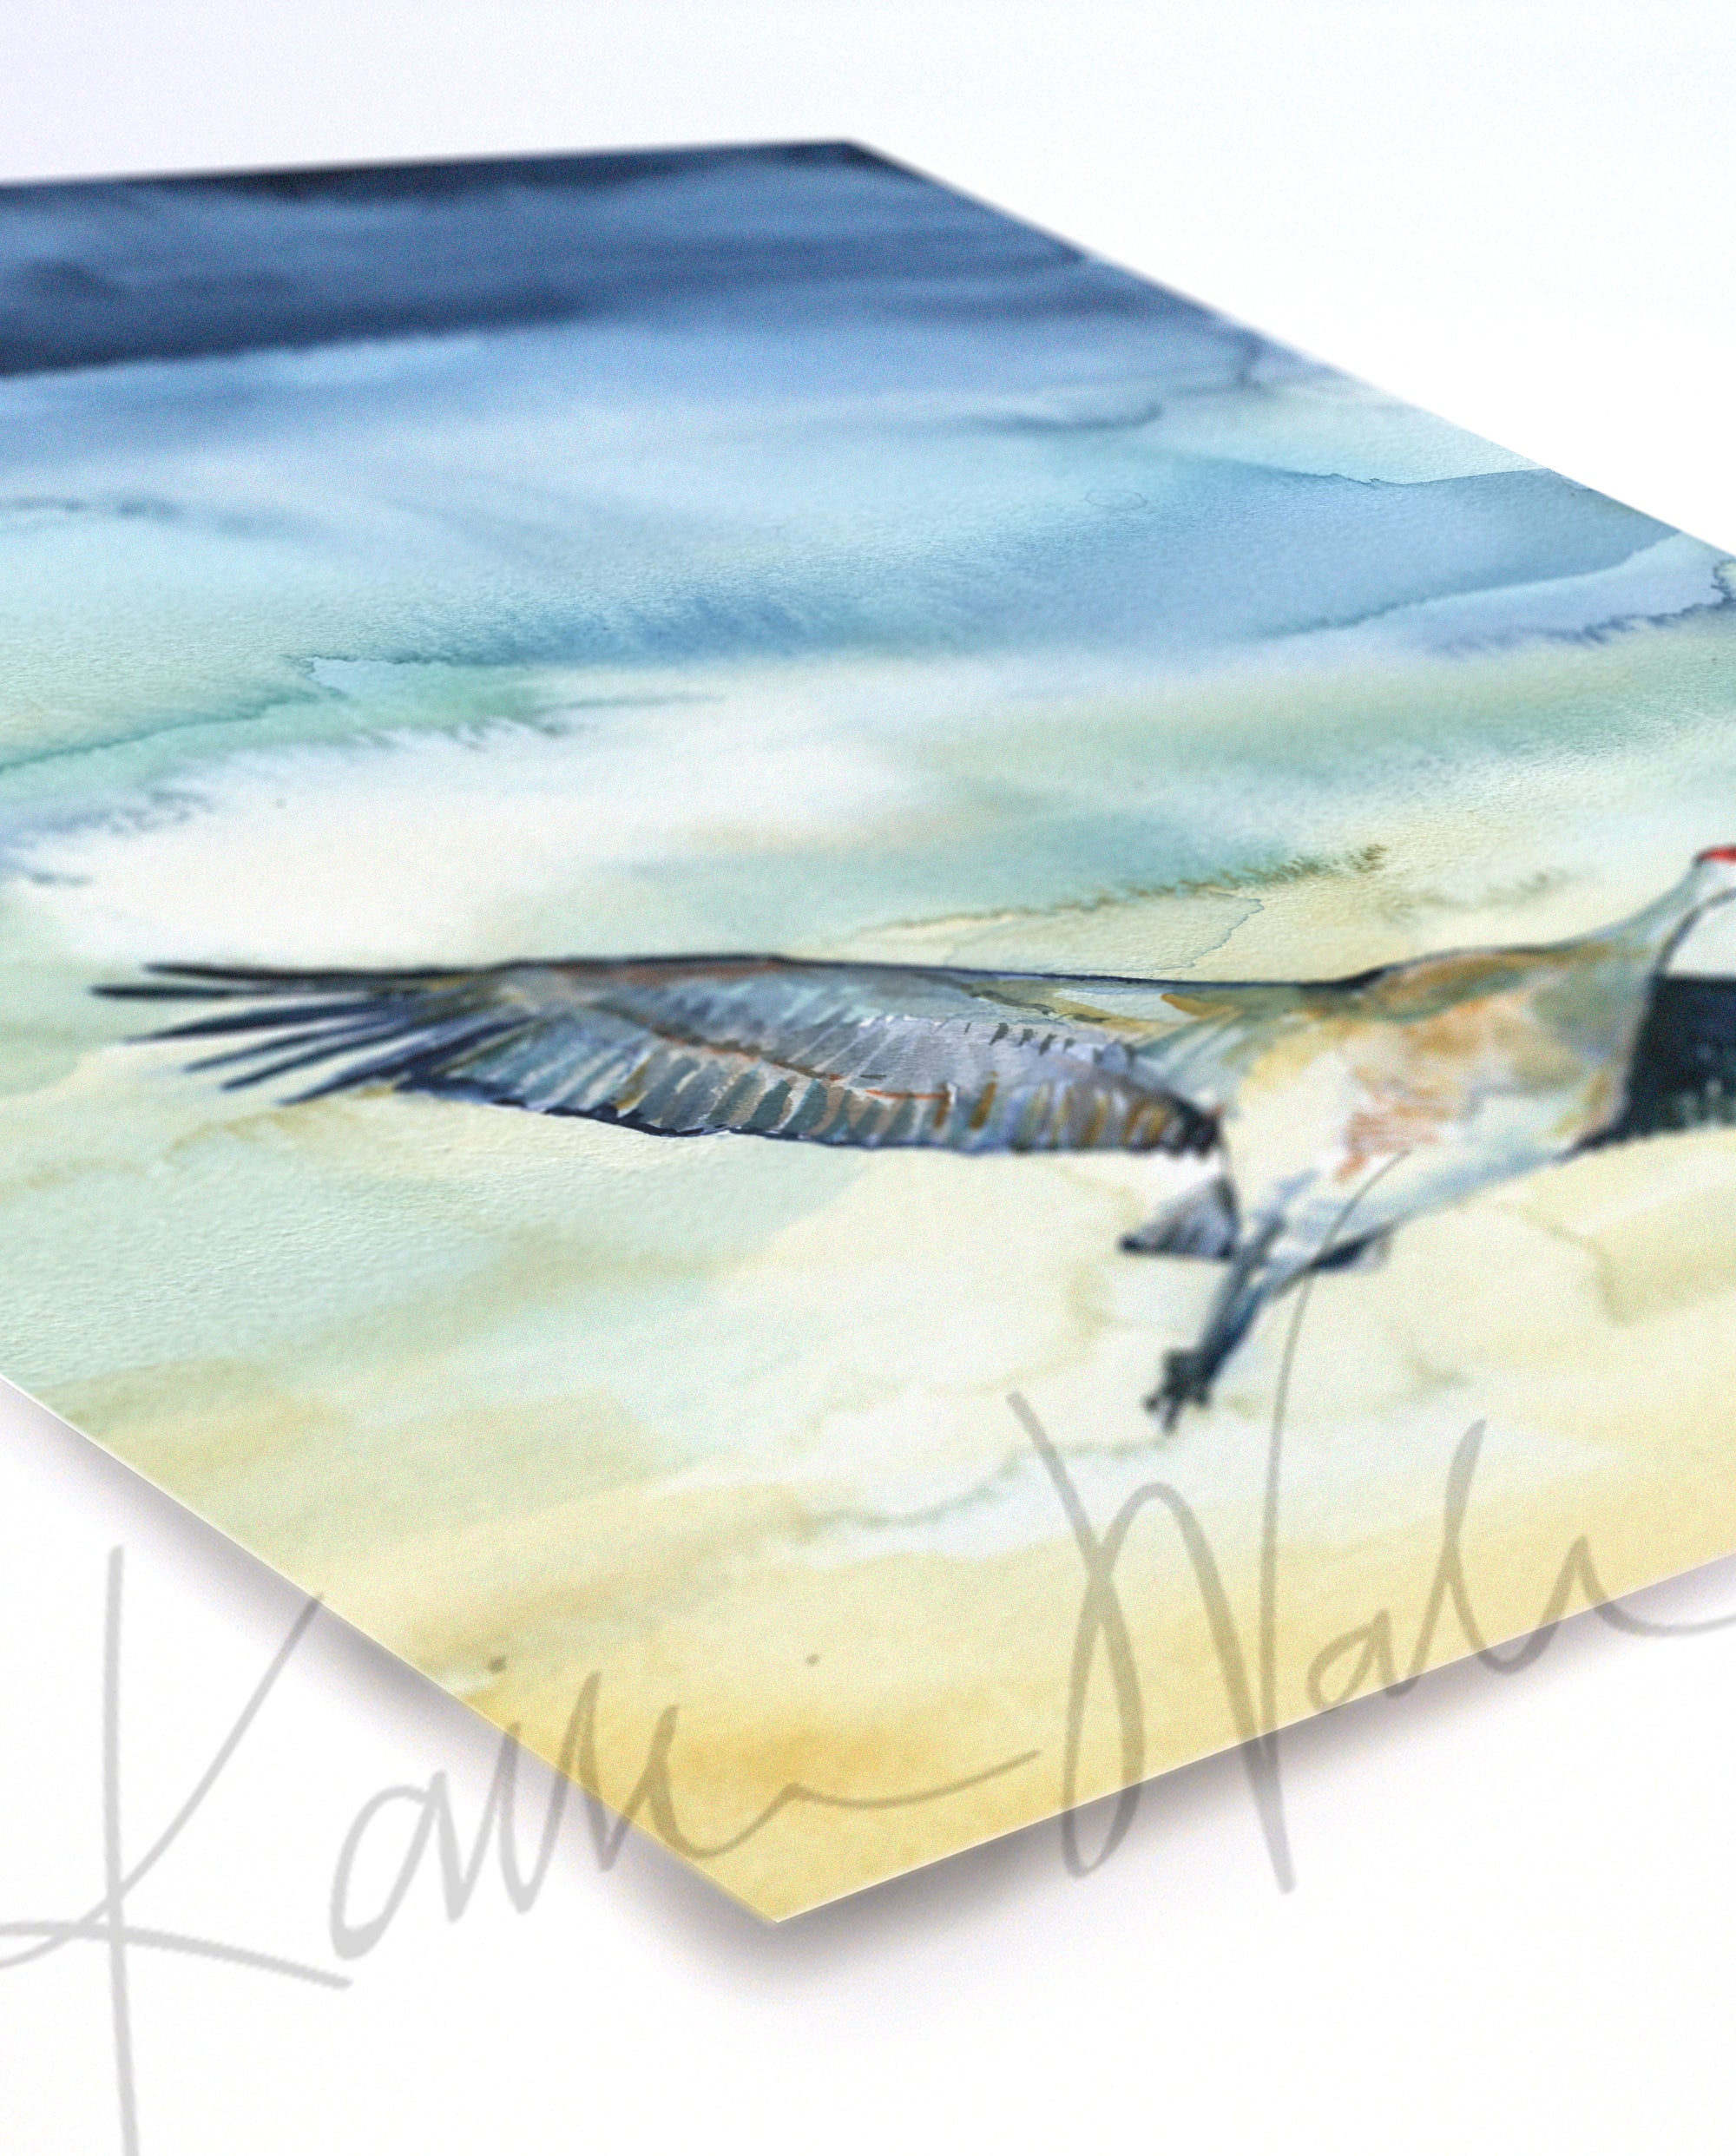 Unframed watercolor painting of a flying crane, at an angle.